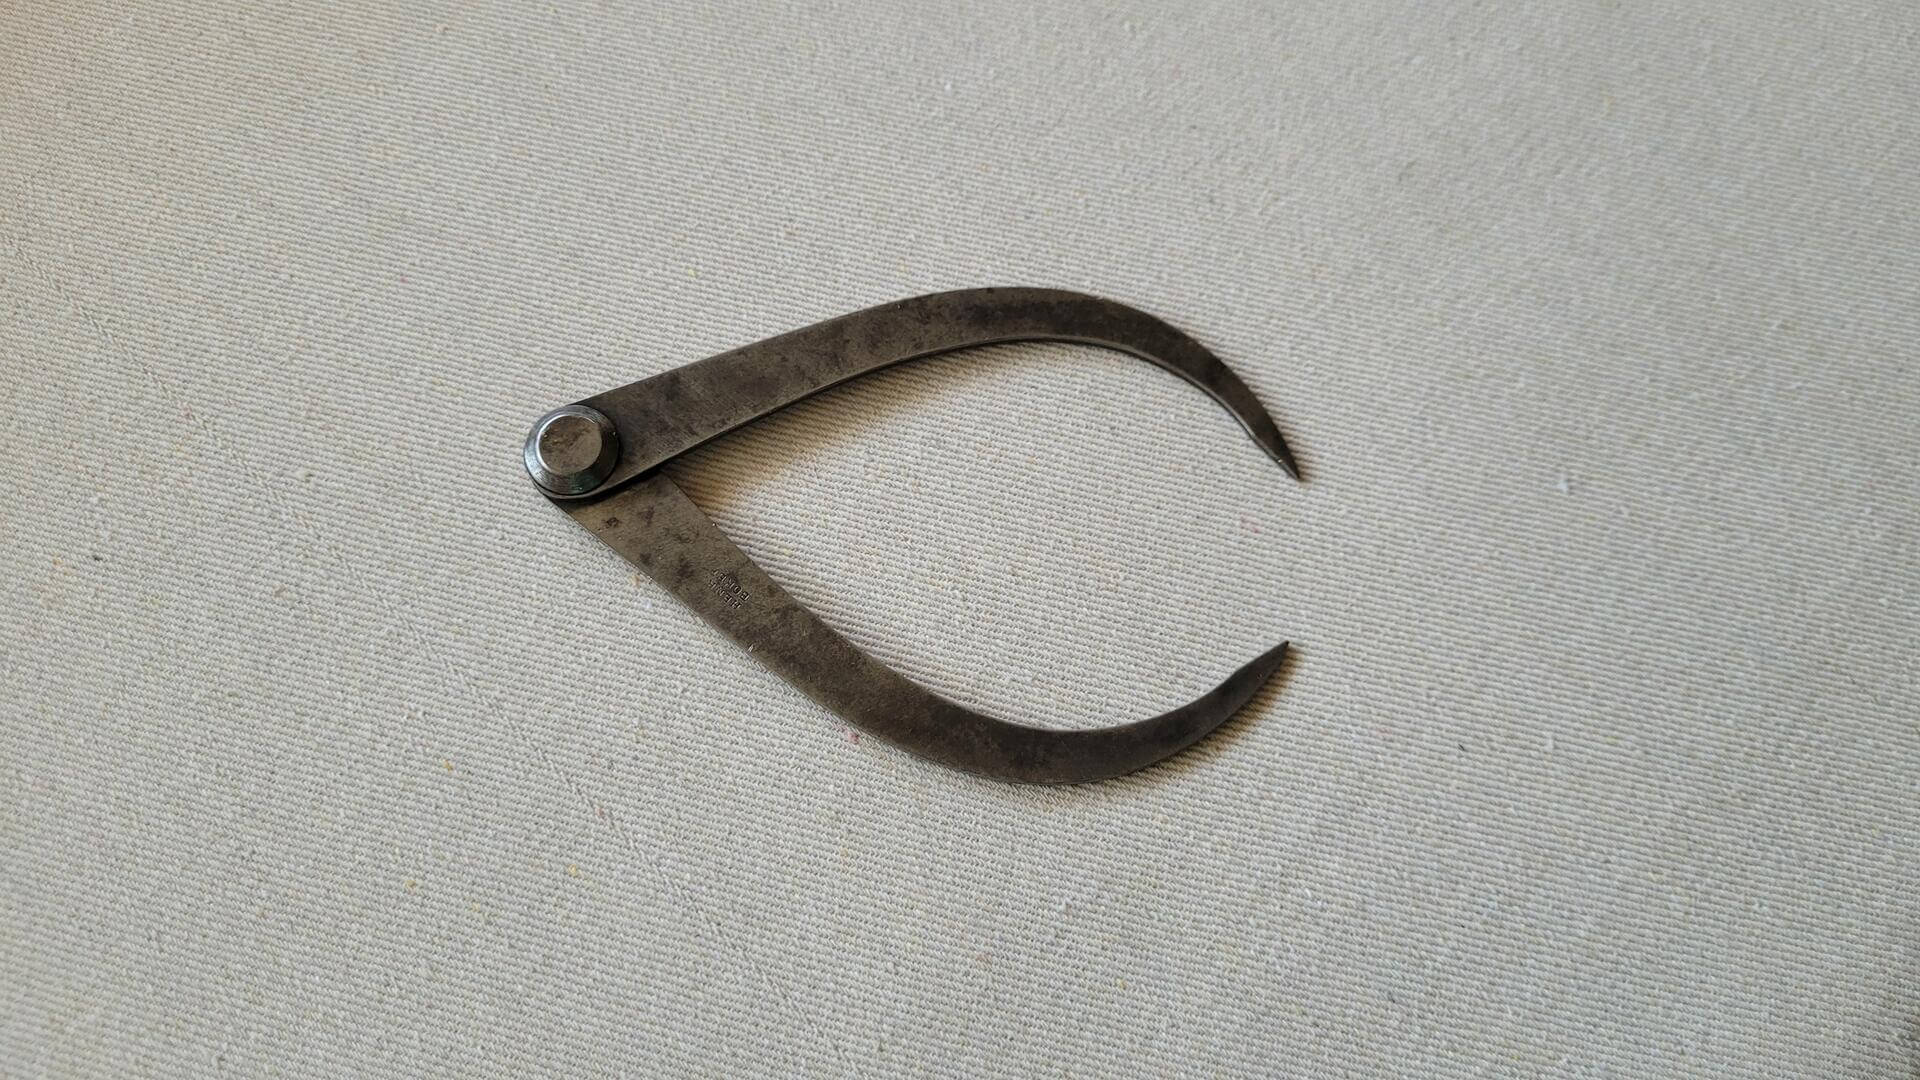 Antique Henry Boker firm joint outside caliper. Vintage made in Germany collectible carpentry and woodworking marking and measuring hand tools